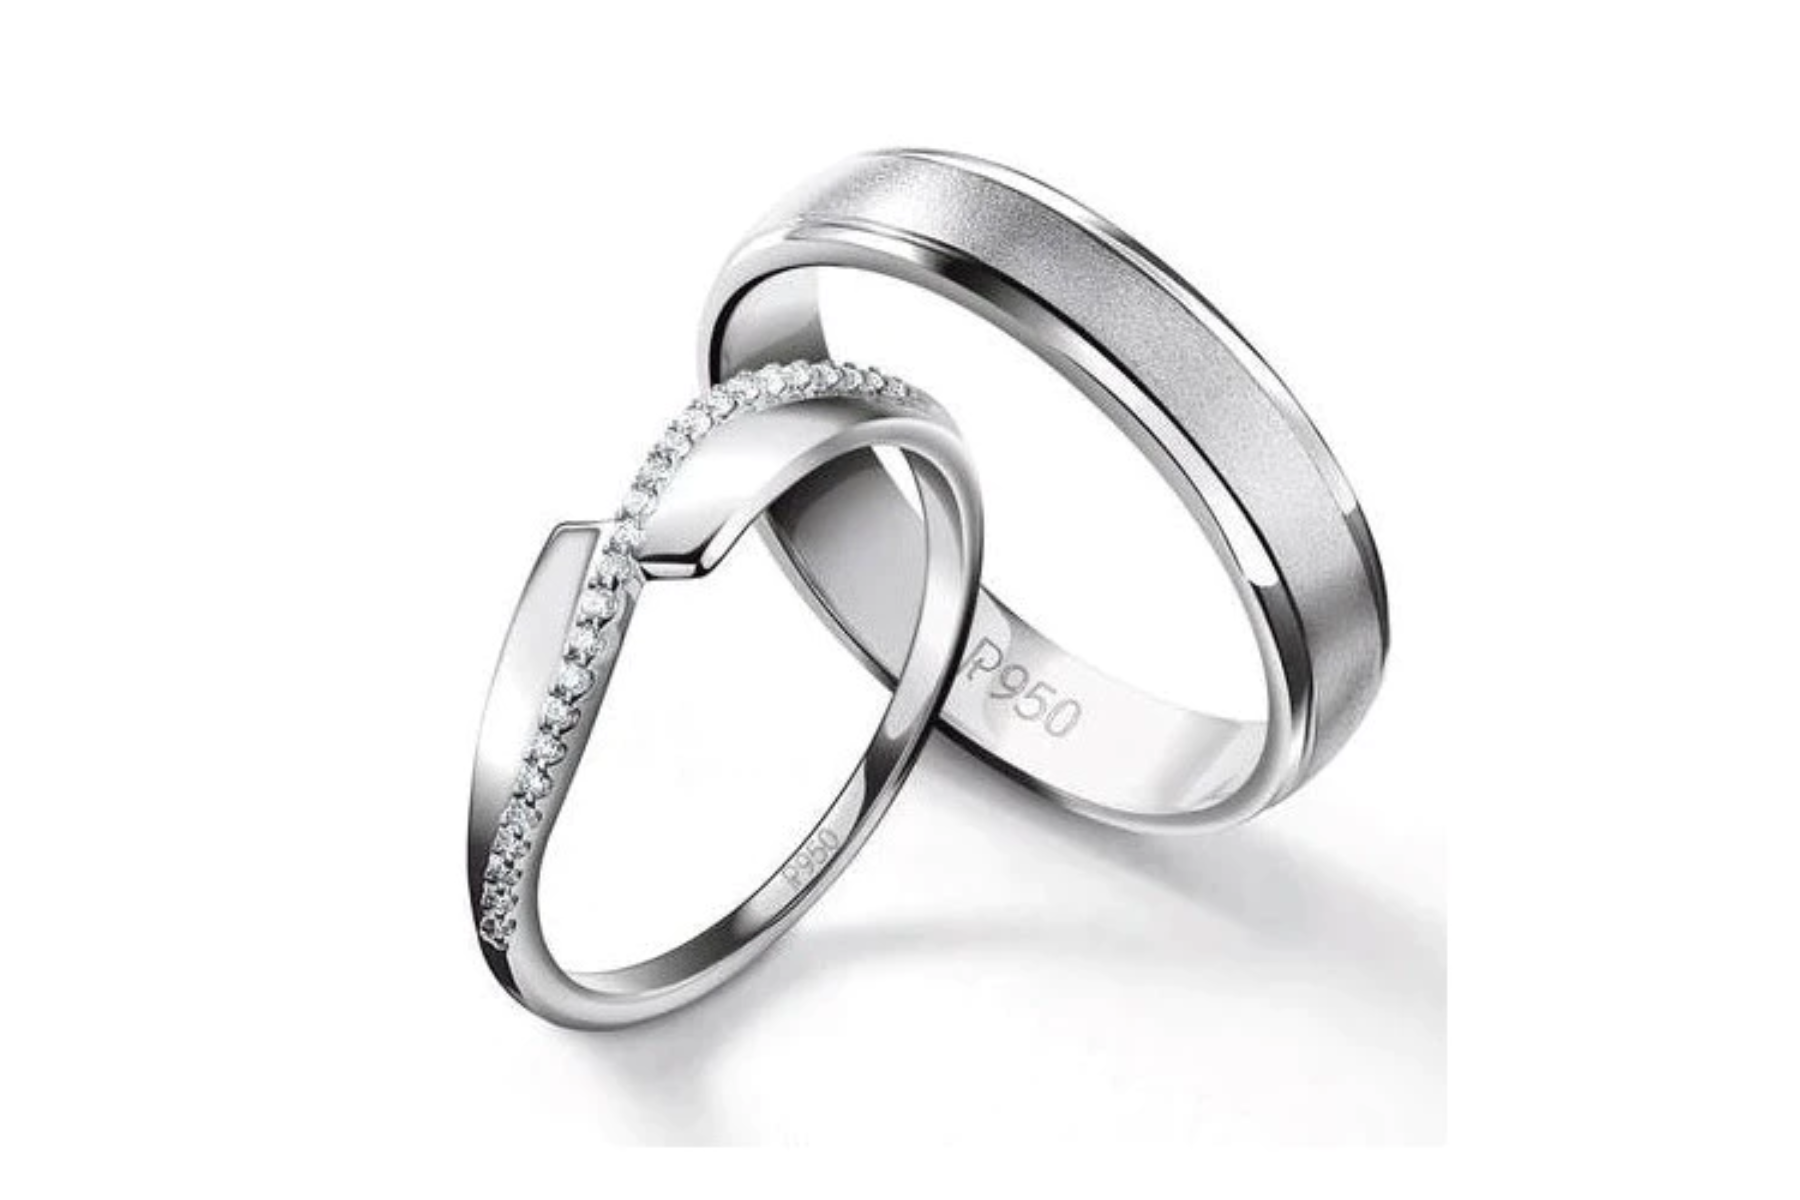 Two platinum rings with a matte finish in the center and a designer ring with a row of diamonds